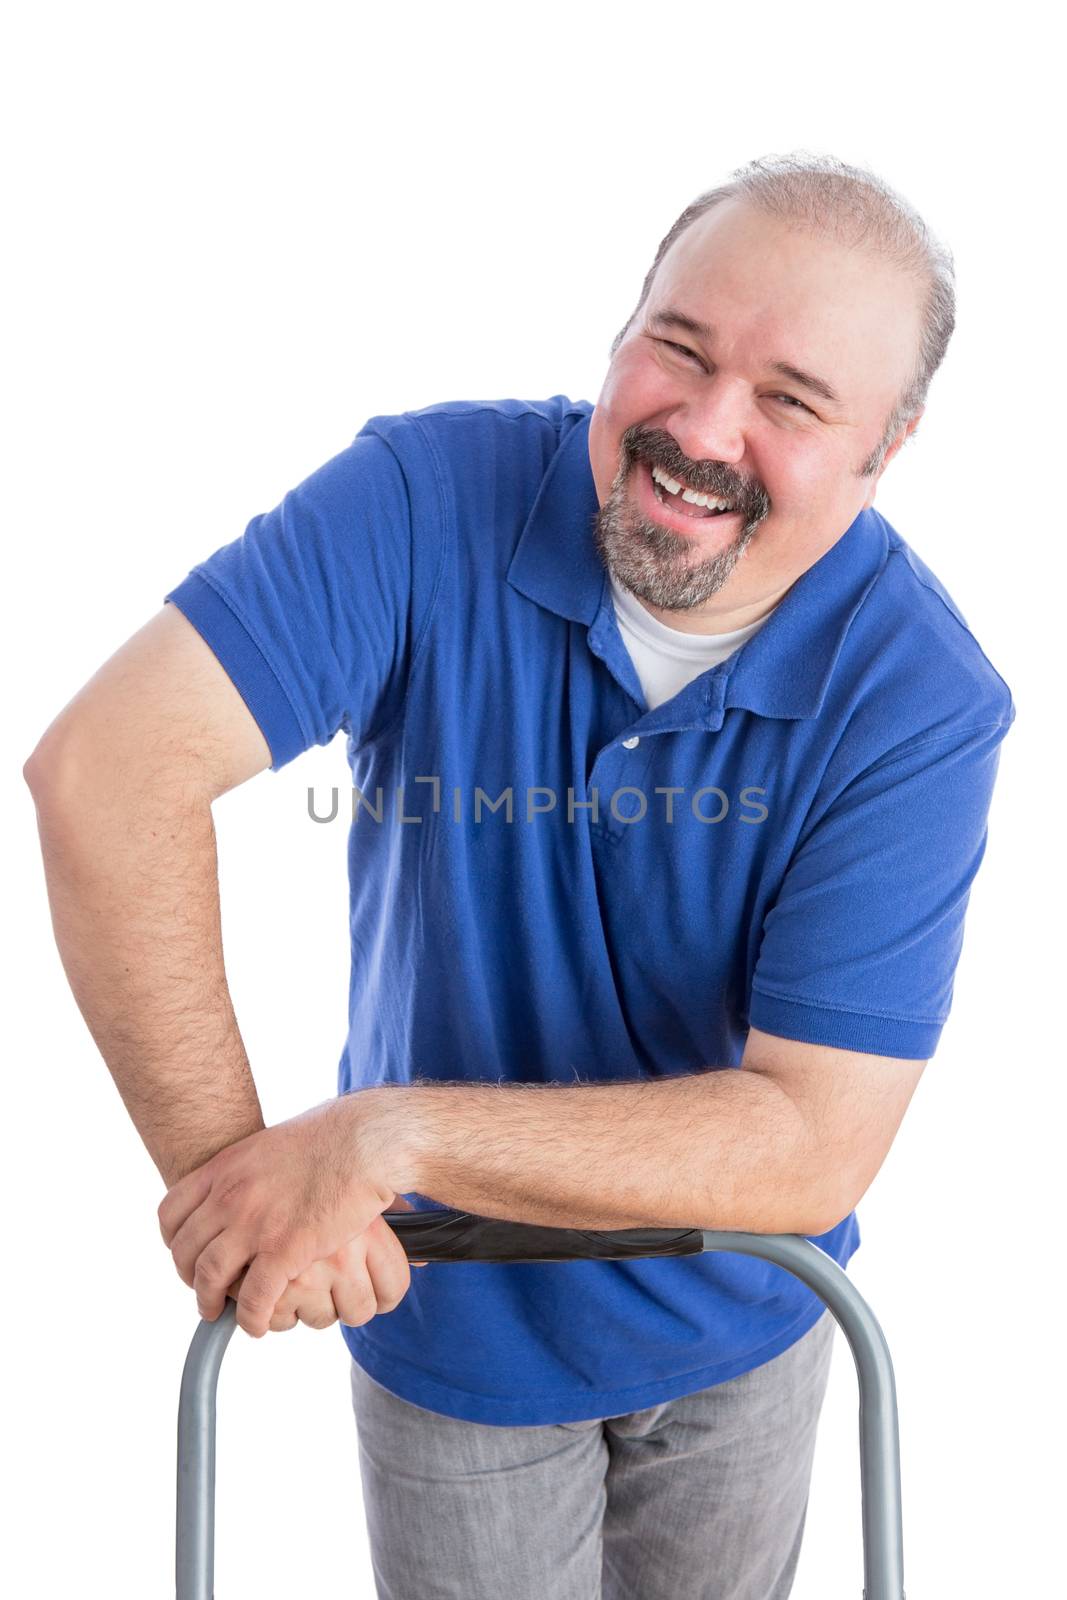 Happy Adult Male Worker Leaning Against the Chair, Showing a Genuine Toothy Smile While Looking at the Camera. Isolated on White.